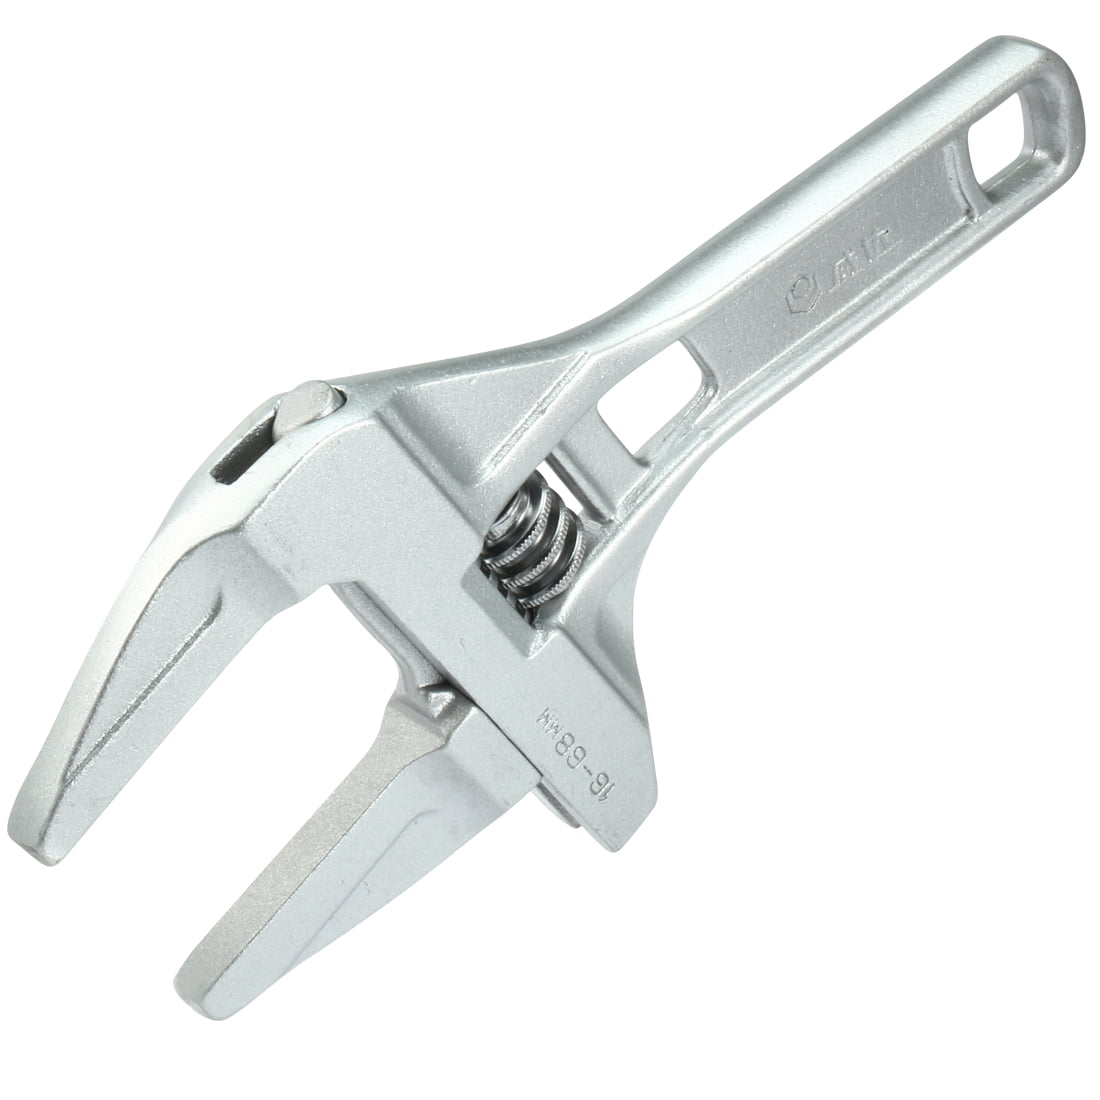 Mini Adjustable Spanner Wrench Short Shank Large Openings Thin # Ultra 16-6 D1C2